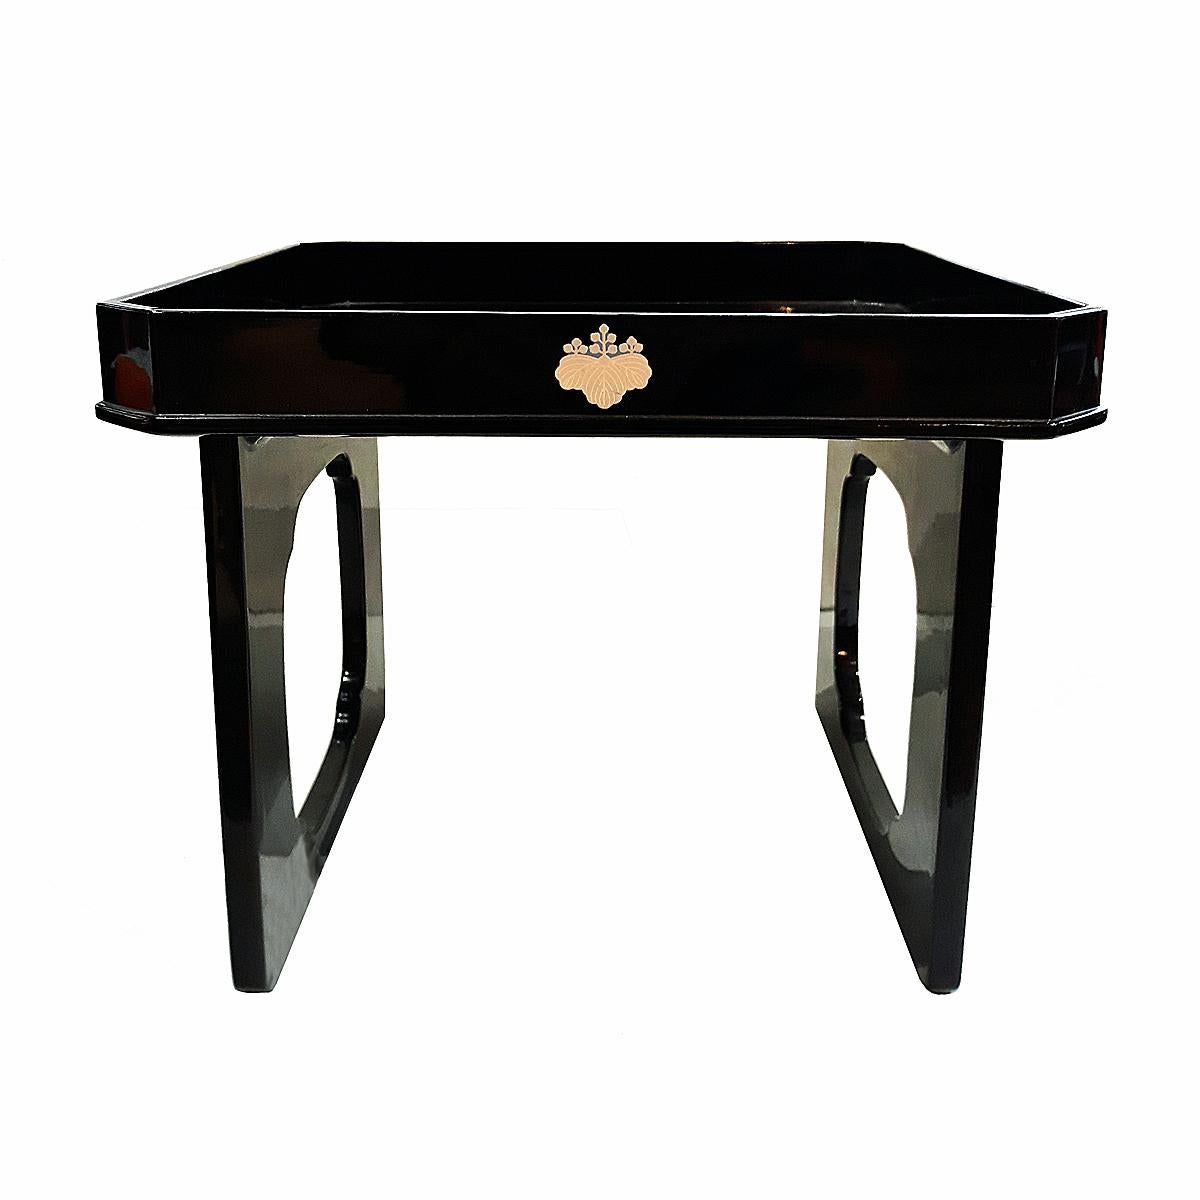 A small, elegant tray table in lacquered wood, circa 1939.
Embossed seal in gold color. Ideal for food presentations, object display or simply as a home accessory.